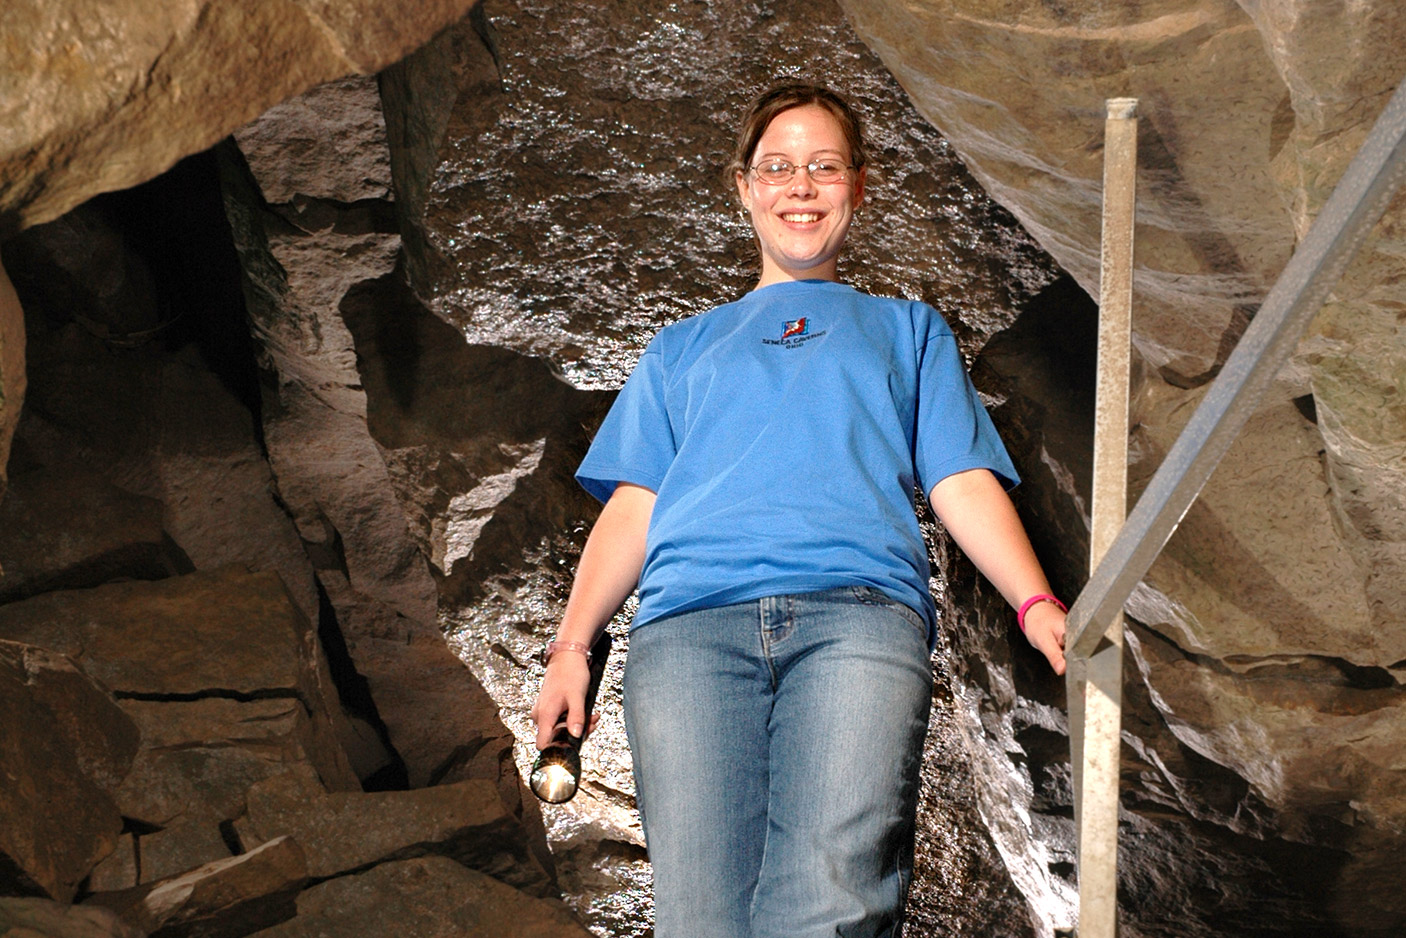 girl standing in cave